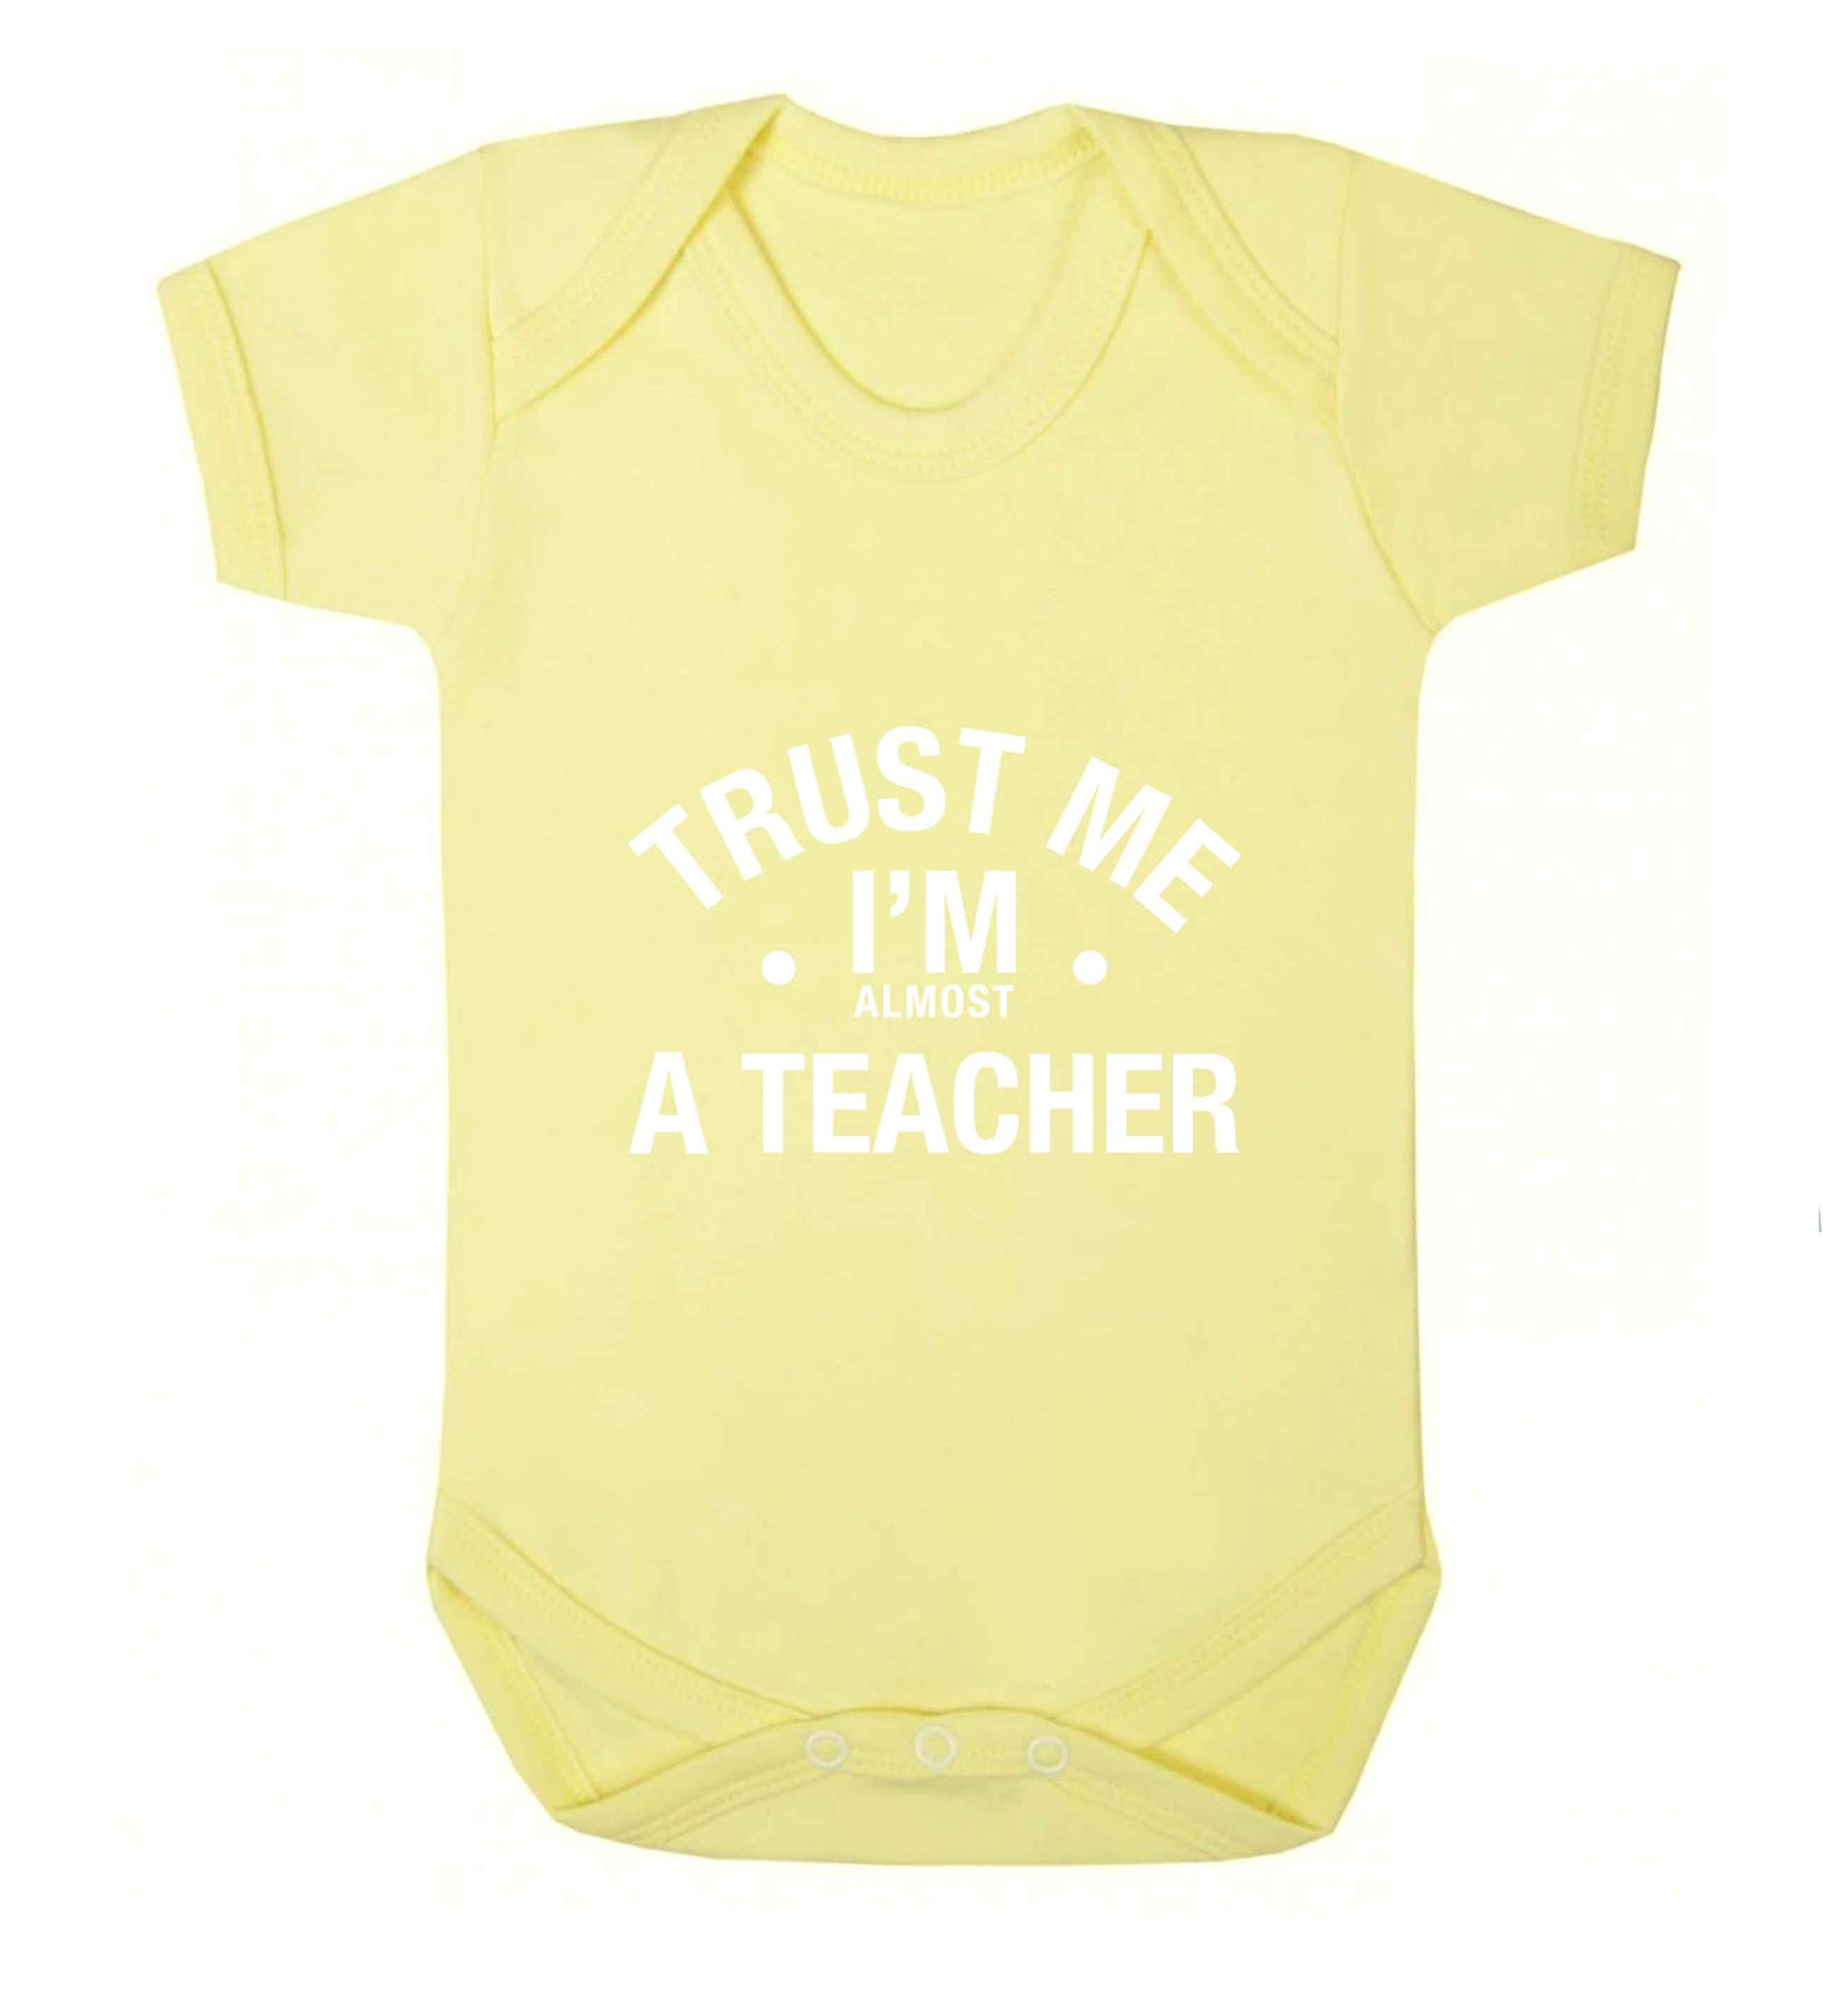 Trust me I'm almost a teacher baby vest pale yellow 18-24 months